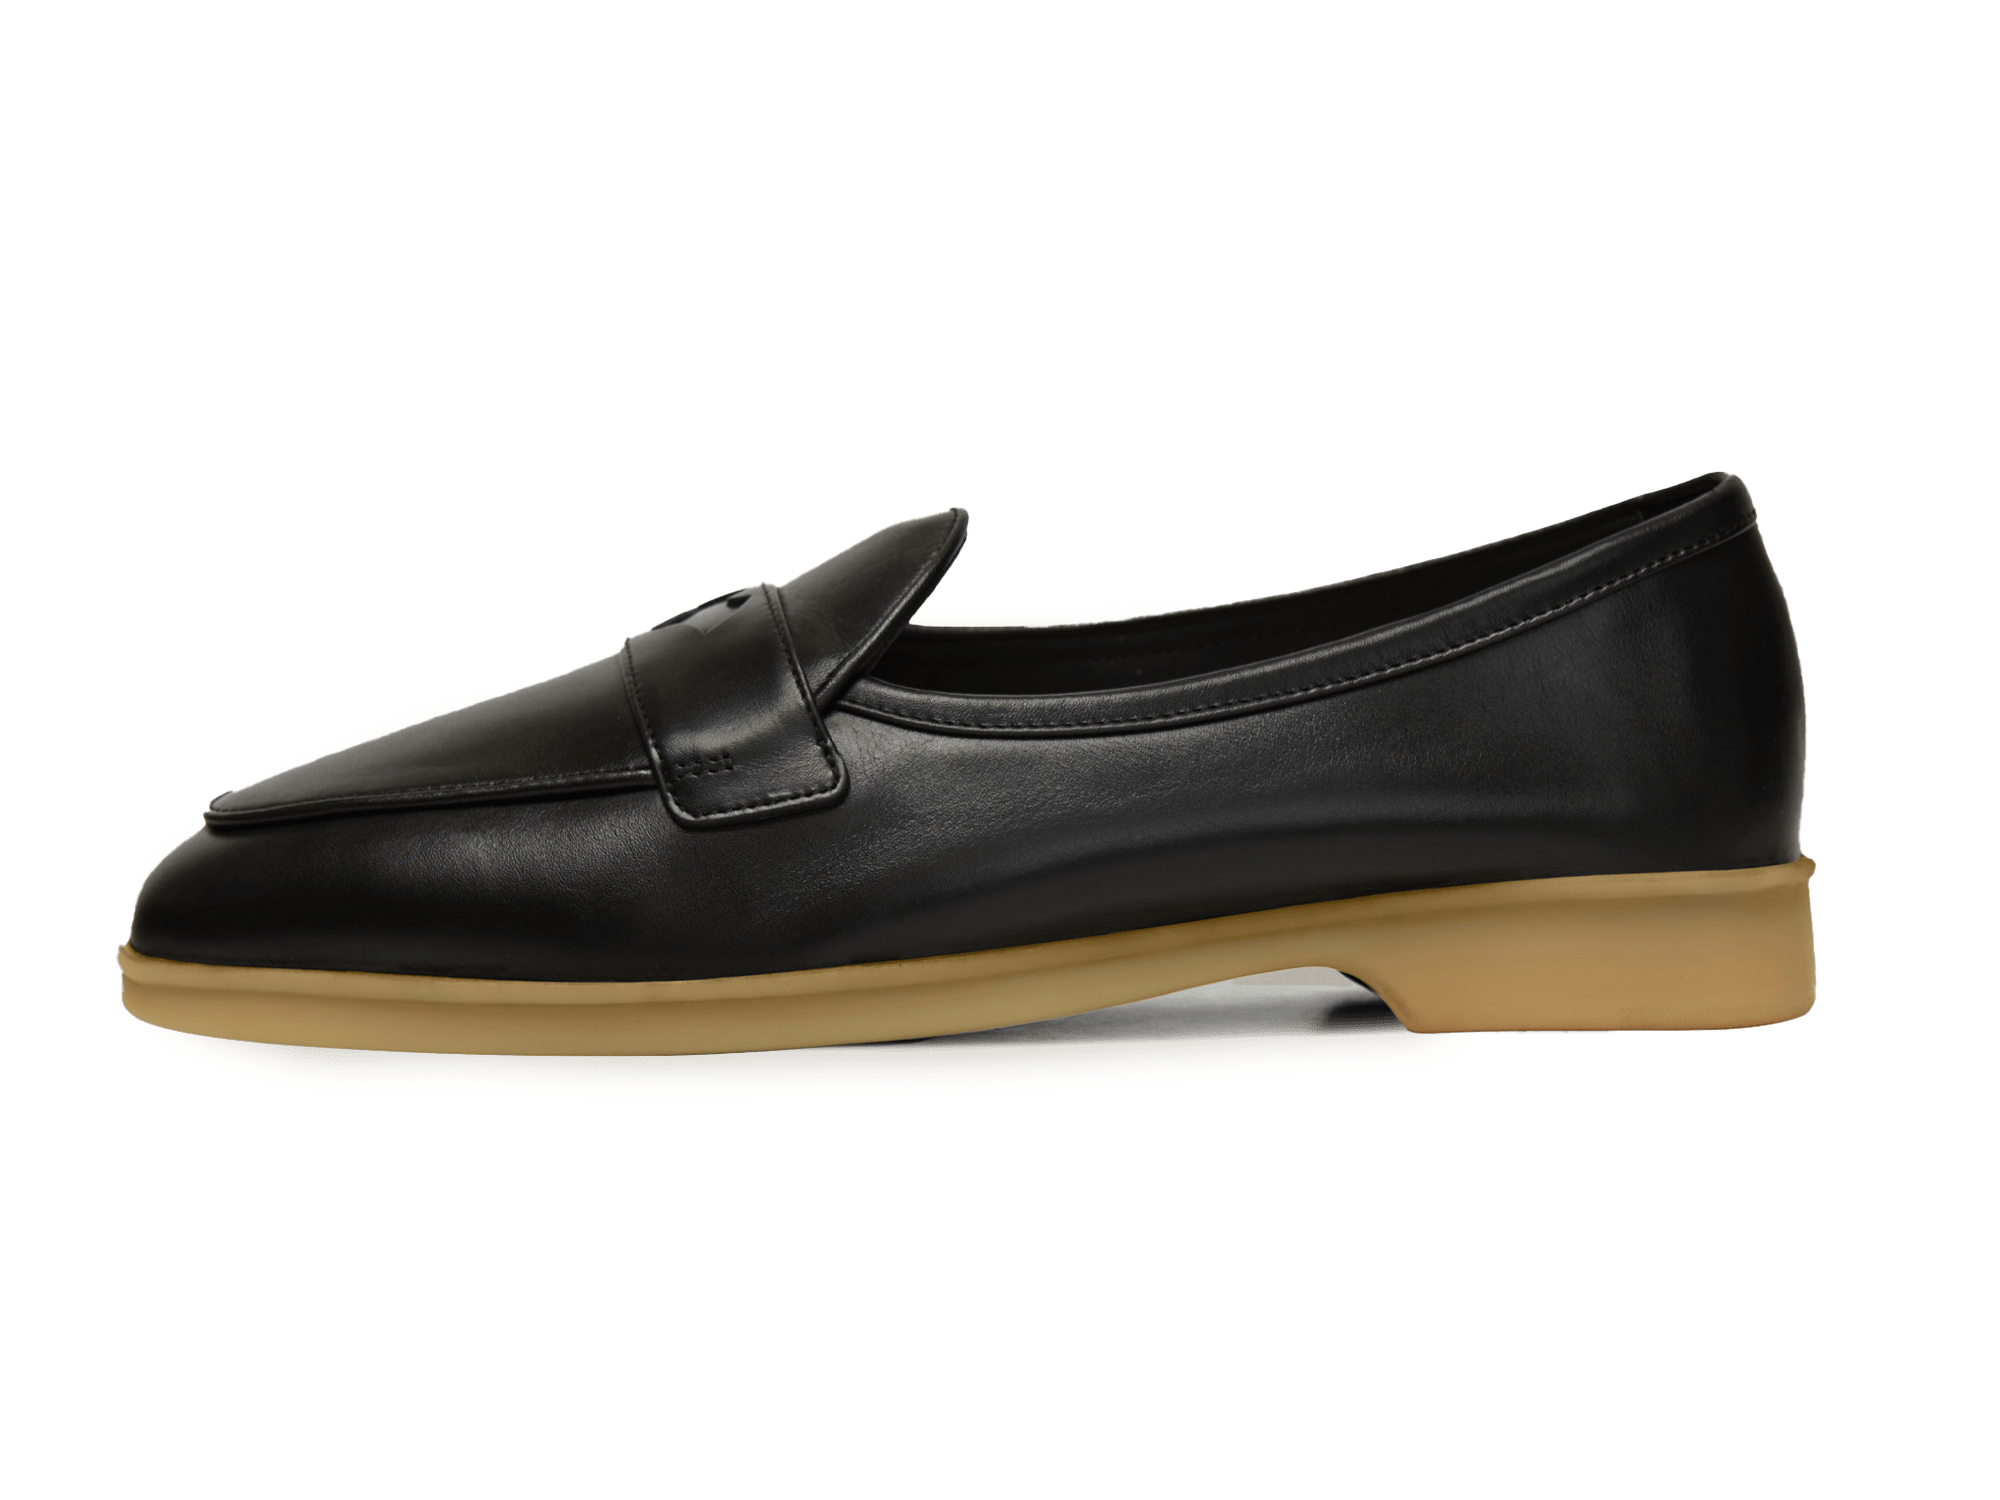 Stride Penny Loafers in Black Milled Calf Natural Sole